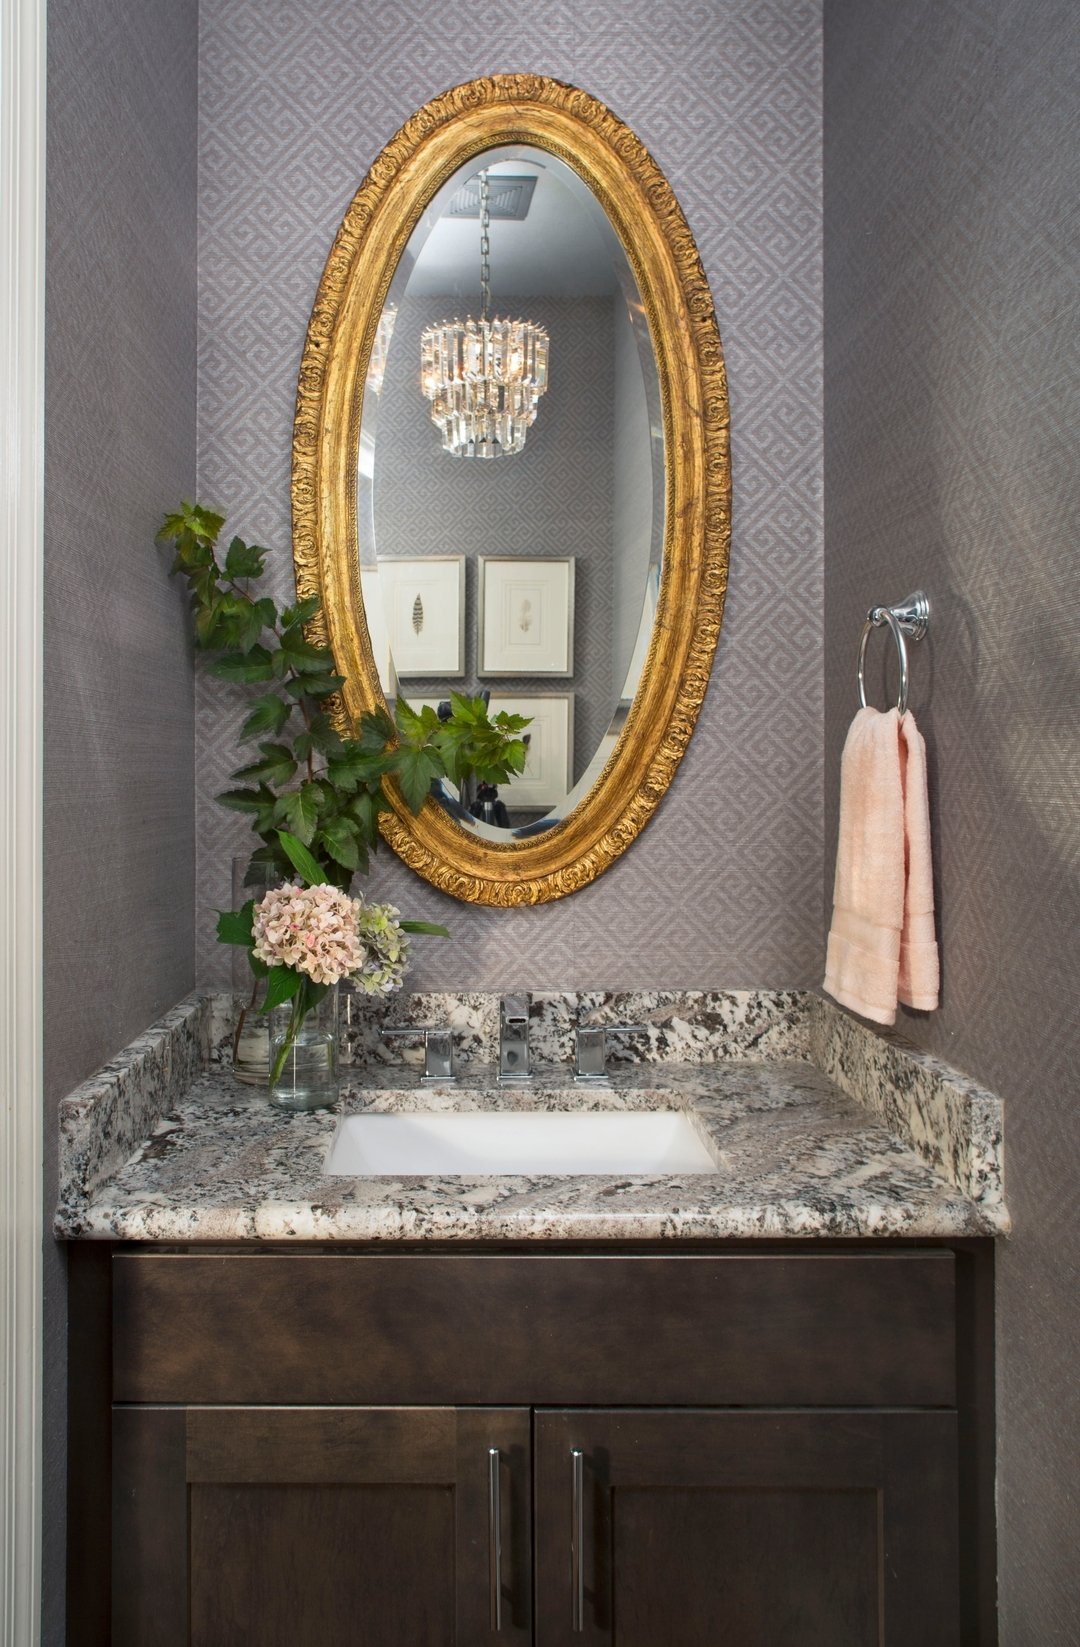 Does your builder grade bath need some love?  I added patterned grasscloth wallpaper, a vintage mirror, and petite crystal chandelier to give this little jewel box a refresh without  remodeling. 

#powderbath #wallpaperedpowderroom #texturedgrassclot